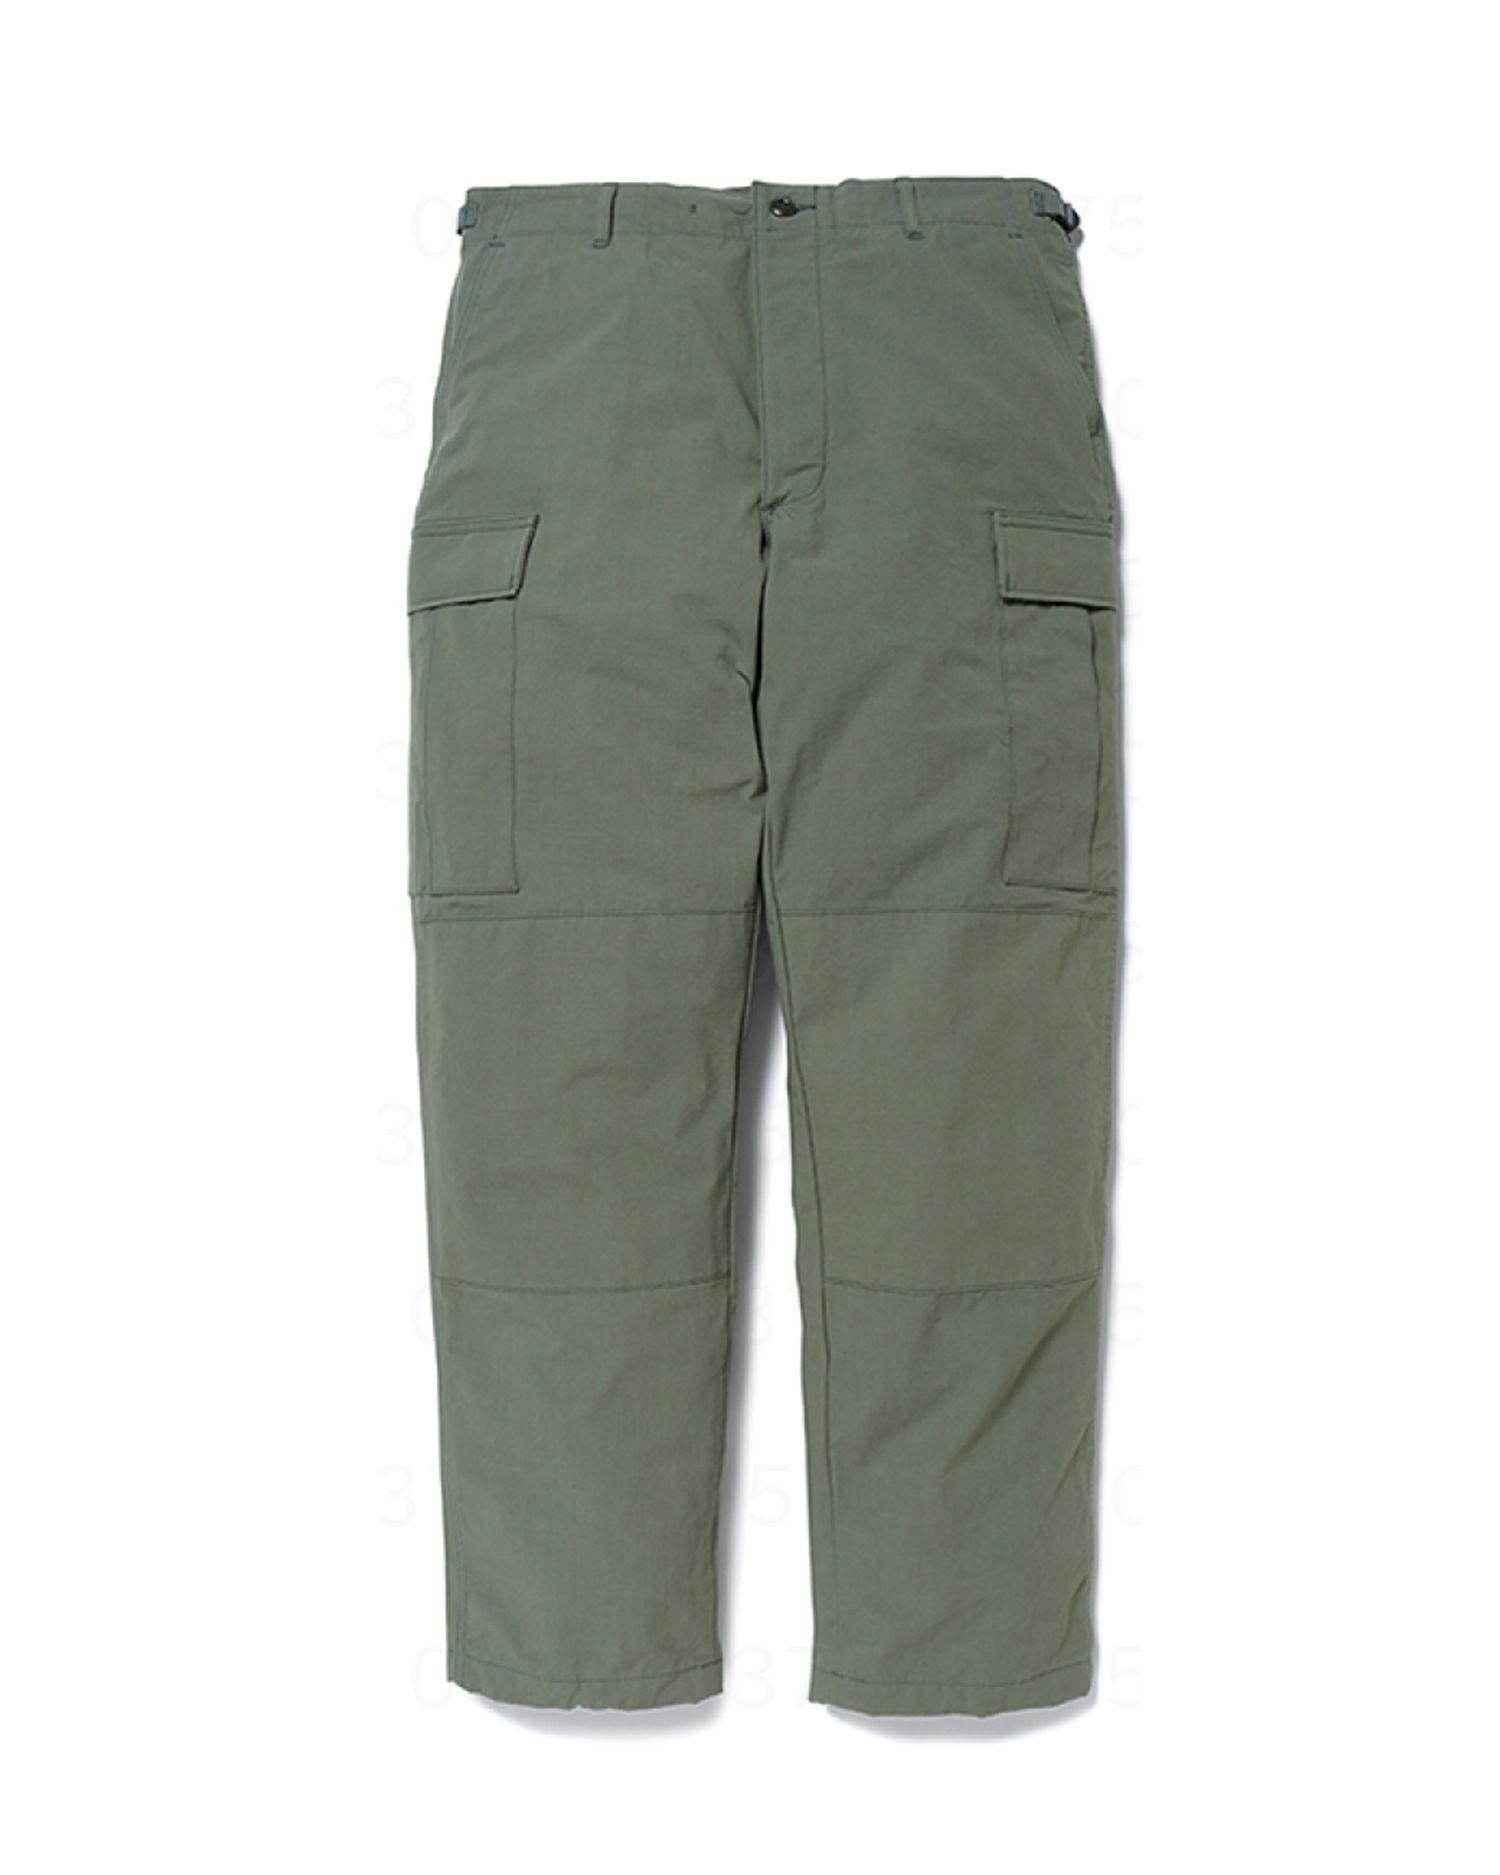 Wmill - Trouser 01 / Trouser / Nyco Ripstop by WTAPS | jellibeans